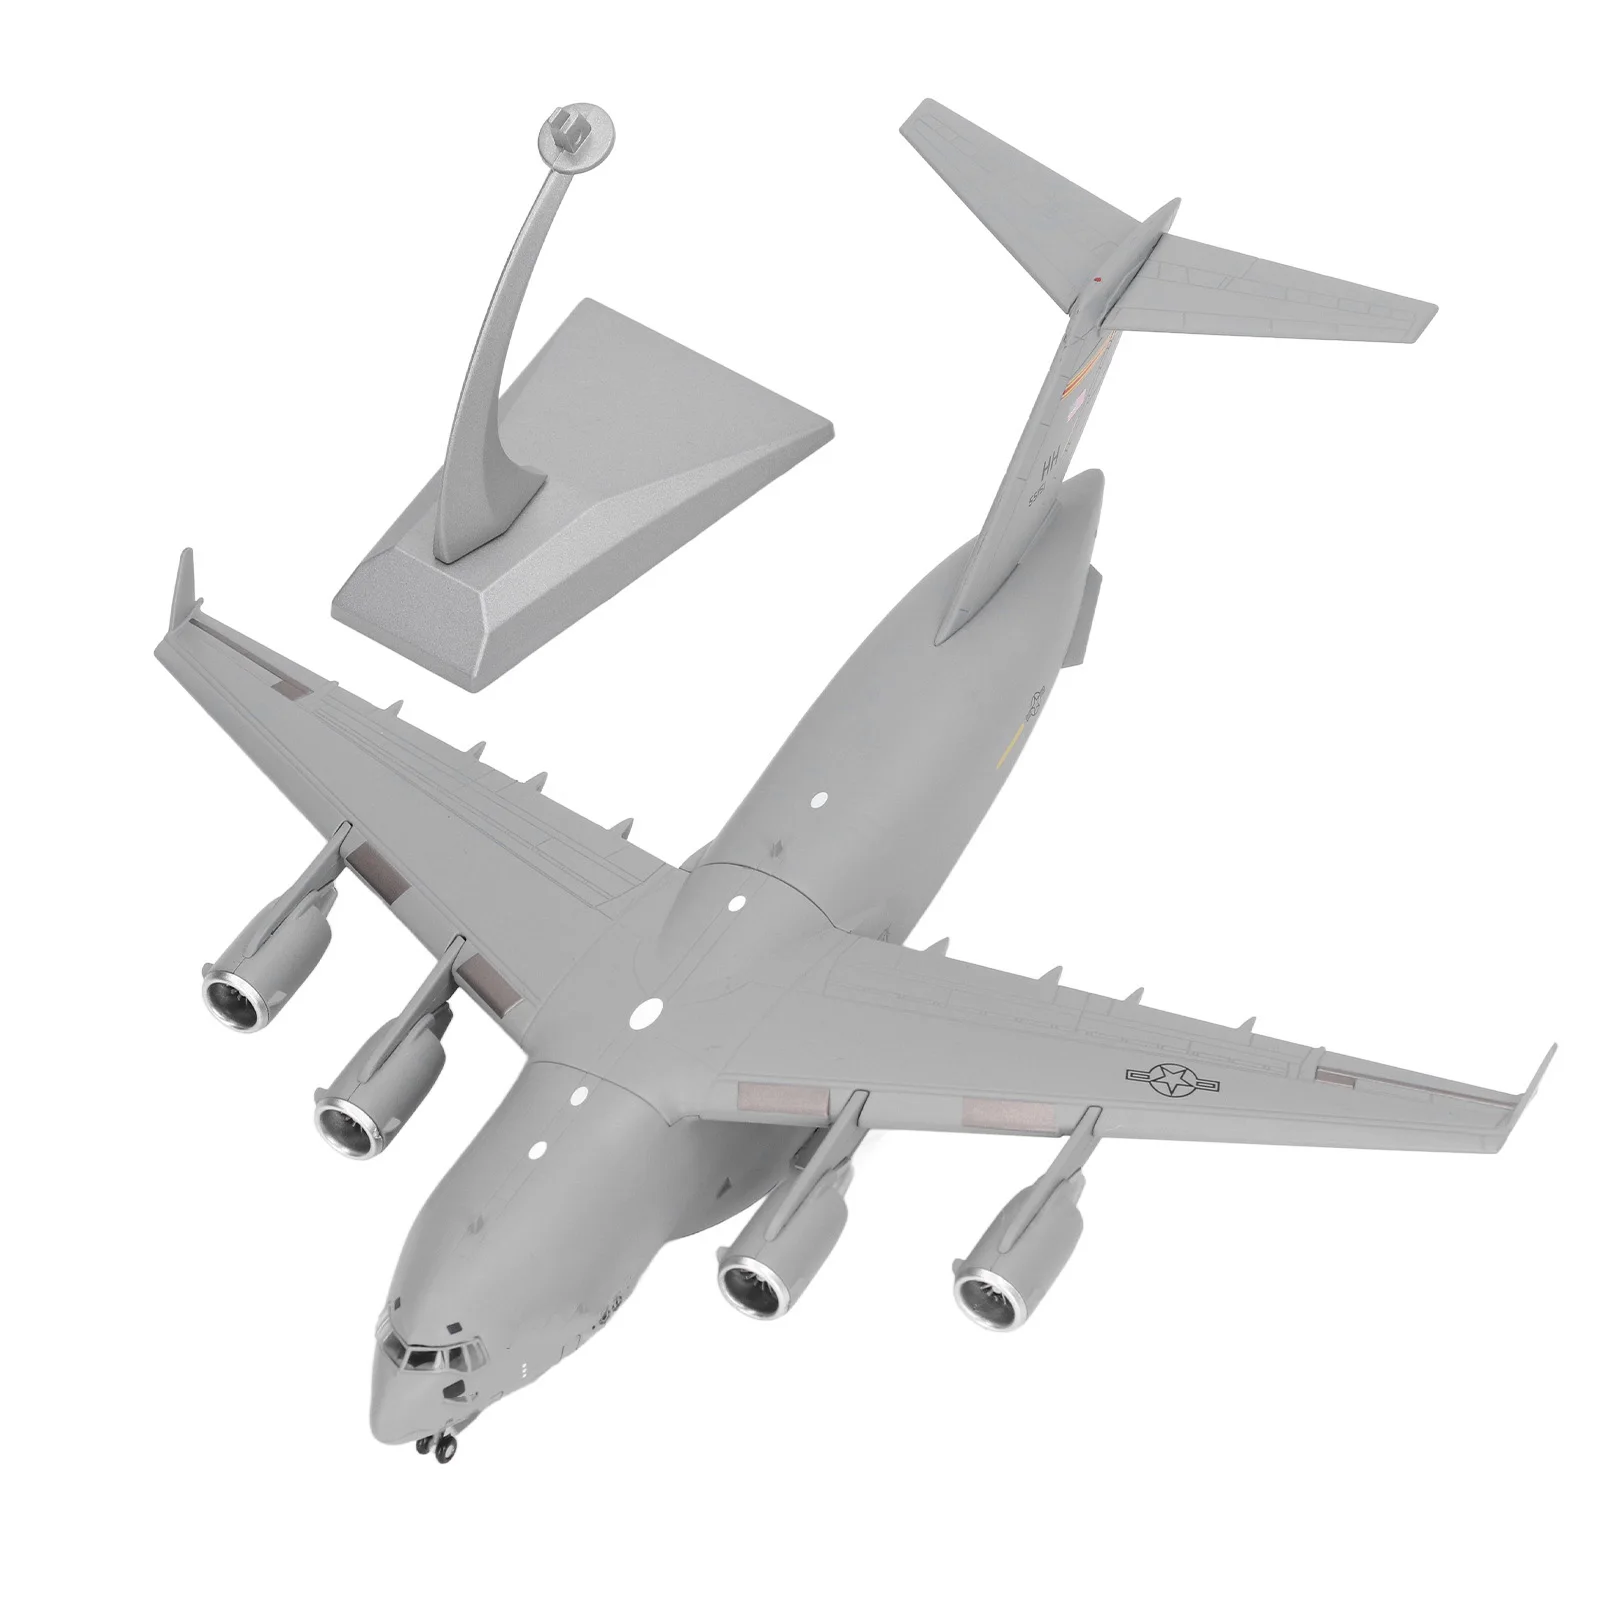 1:200 Scale Aircraft Model Alloy Diecast Simulation Transport Plane Toy With Stable Bracket For Kids Gift Home Decoration 1 200 scale 2 in 1 42cm antonov an 225 model maria ukraine transport plane aircraft collection gift the space shuttle buran an22